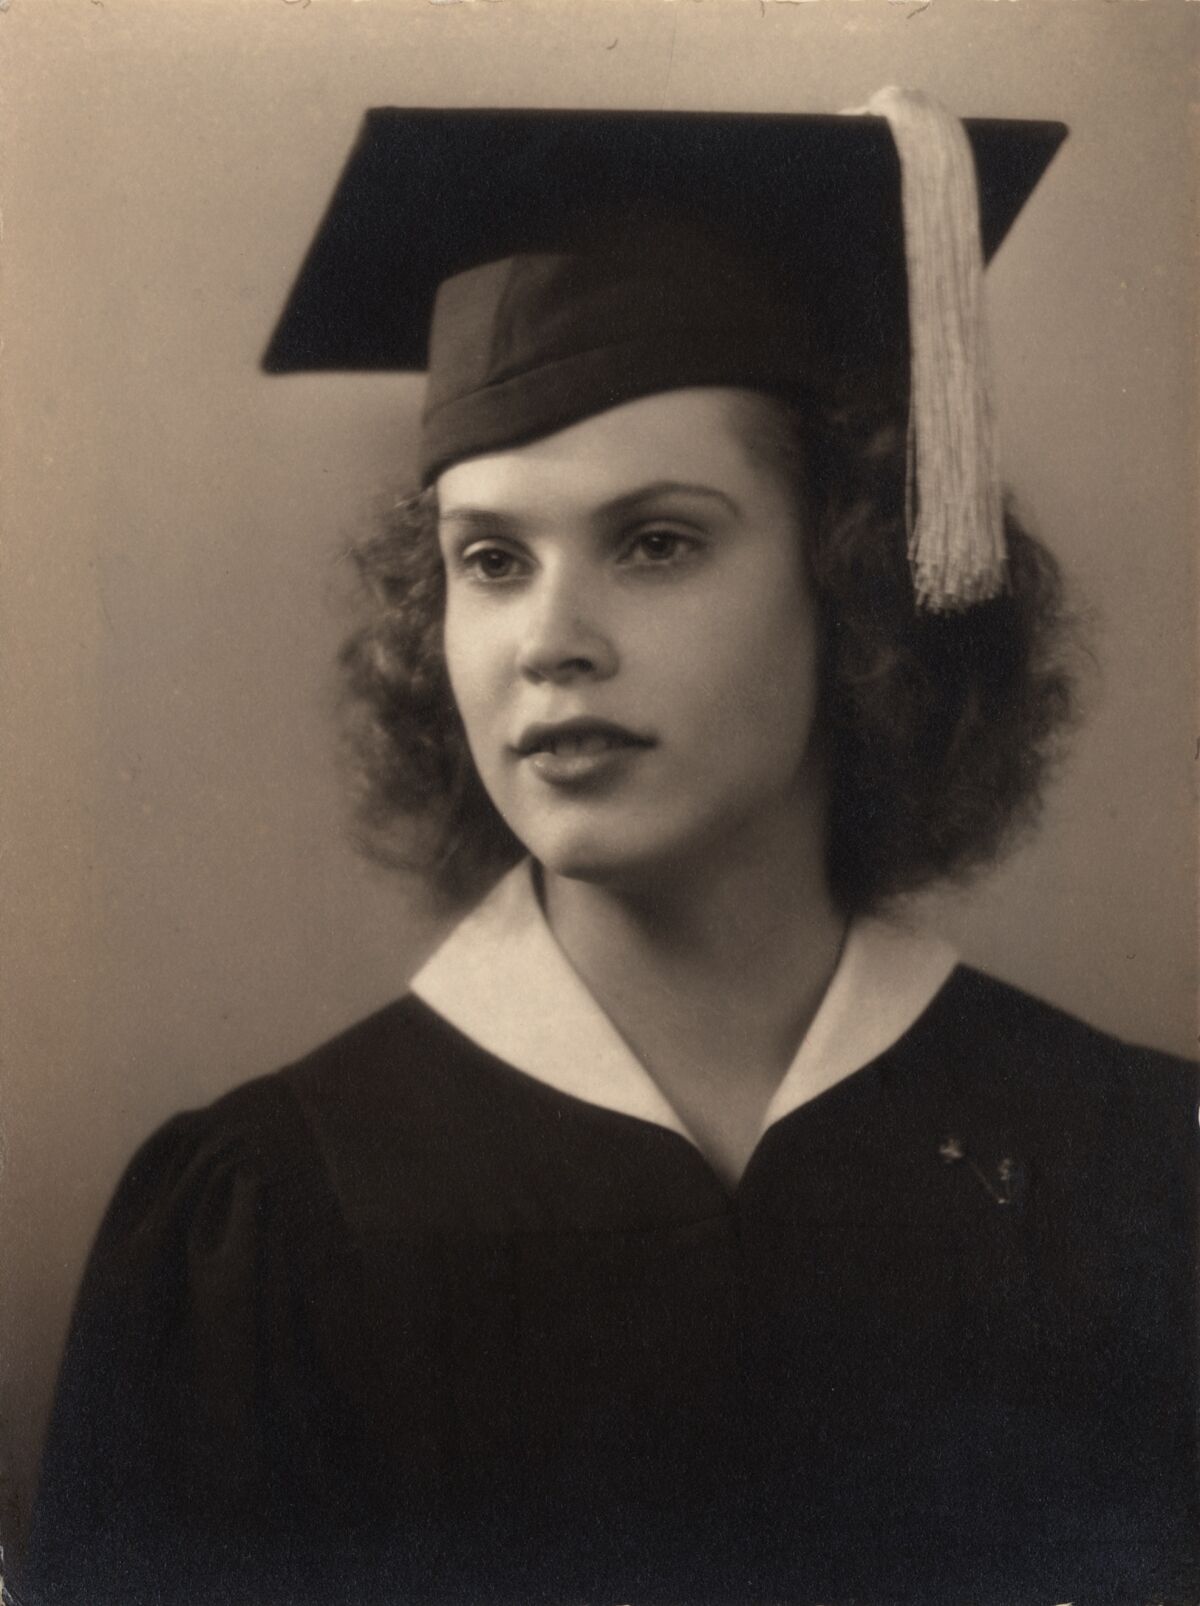 Maila Nermi in cap and gown in her high school graduation photo 